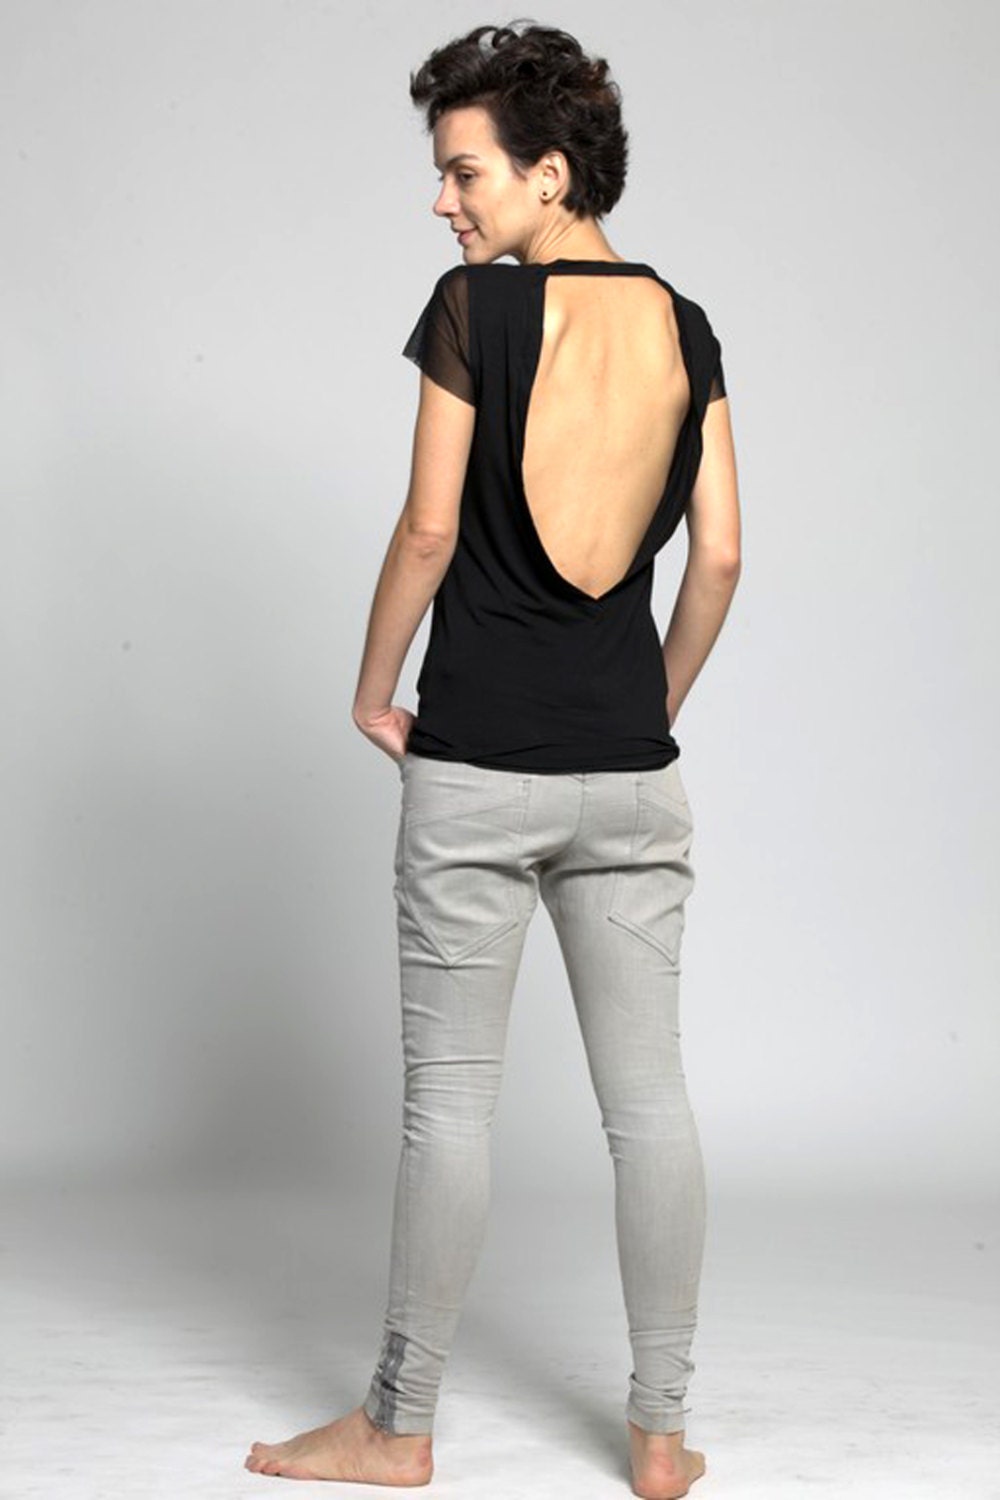 Top with open back, Black womens top, Short sleeve Basic T - ColeHands